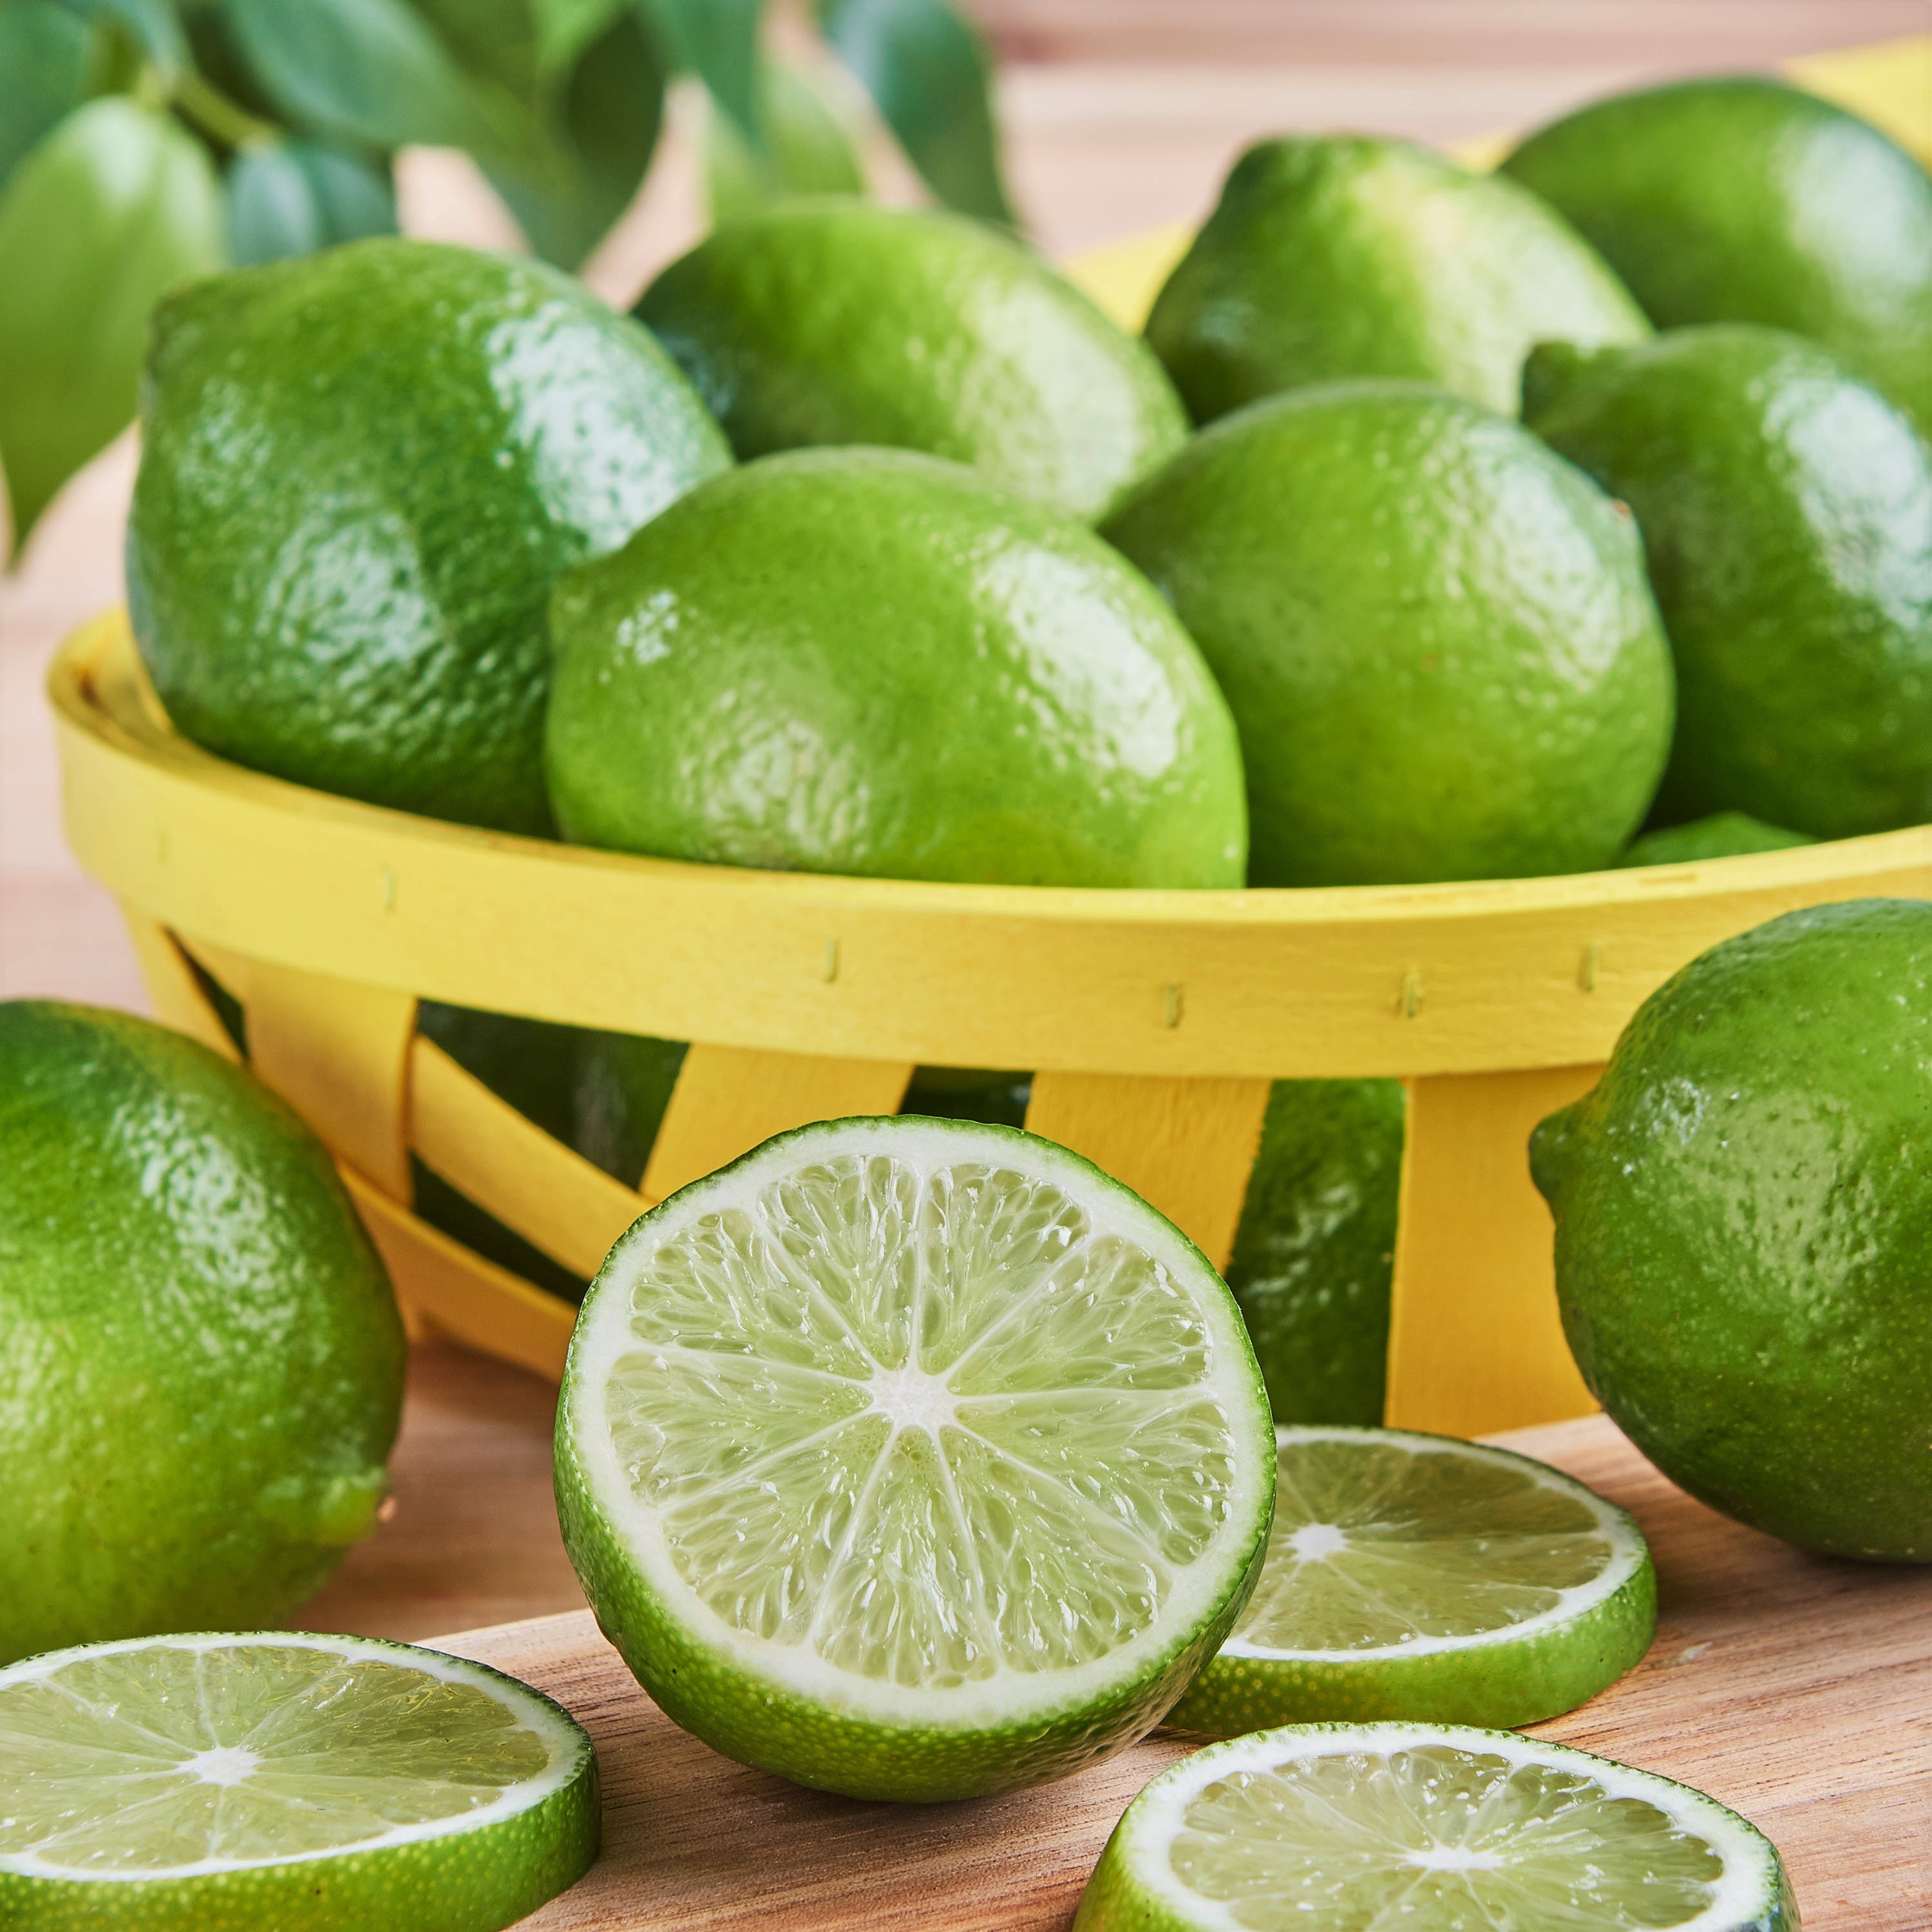 A basket of limes, some sliced open, some cut into slices